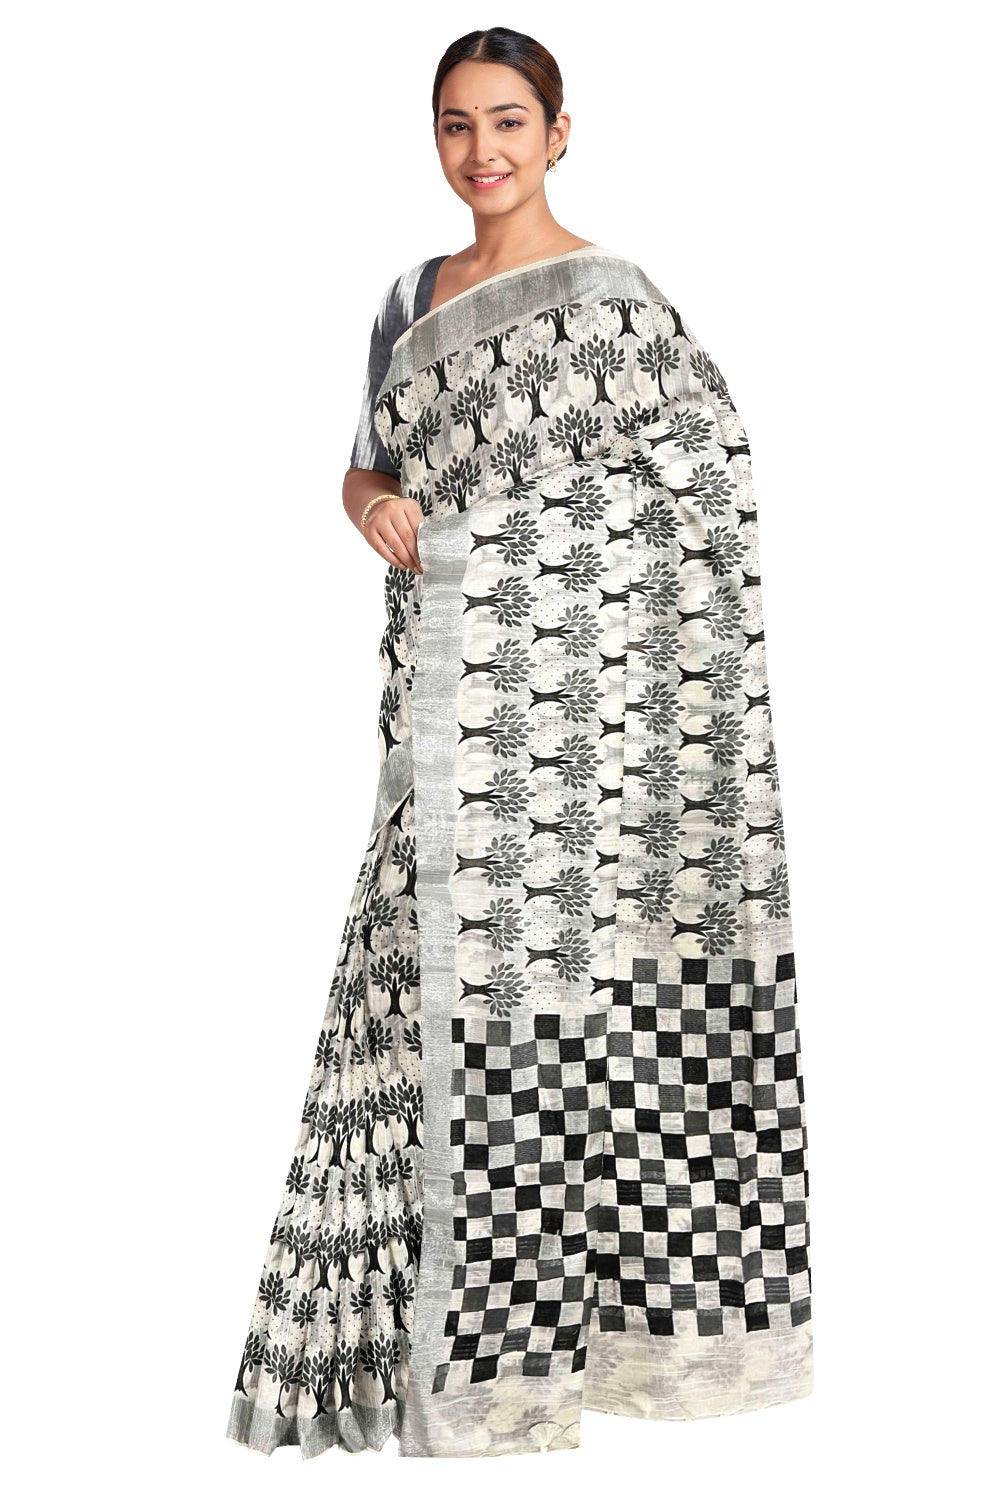 Southloom Linen White and Black Designer Saree with Tassels